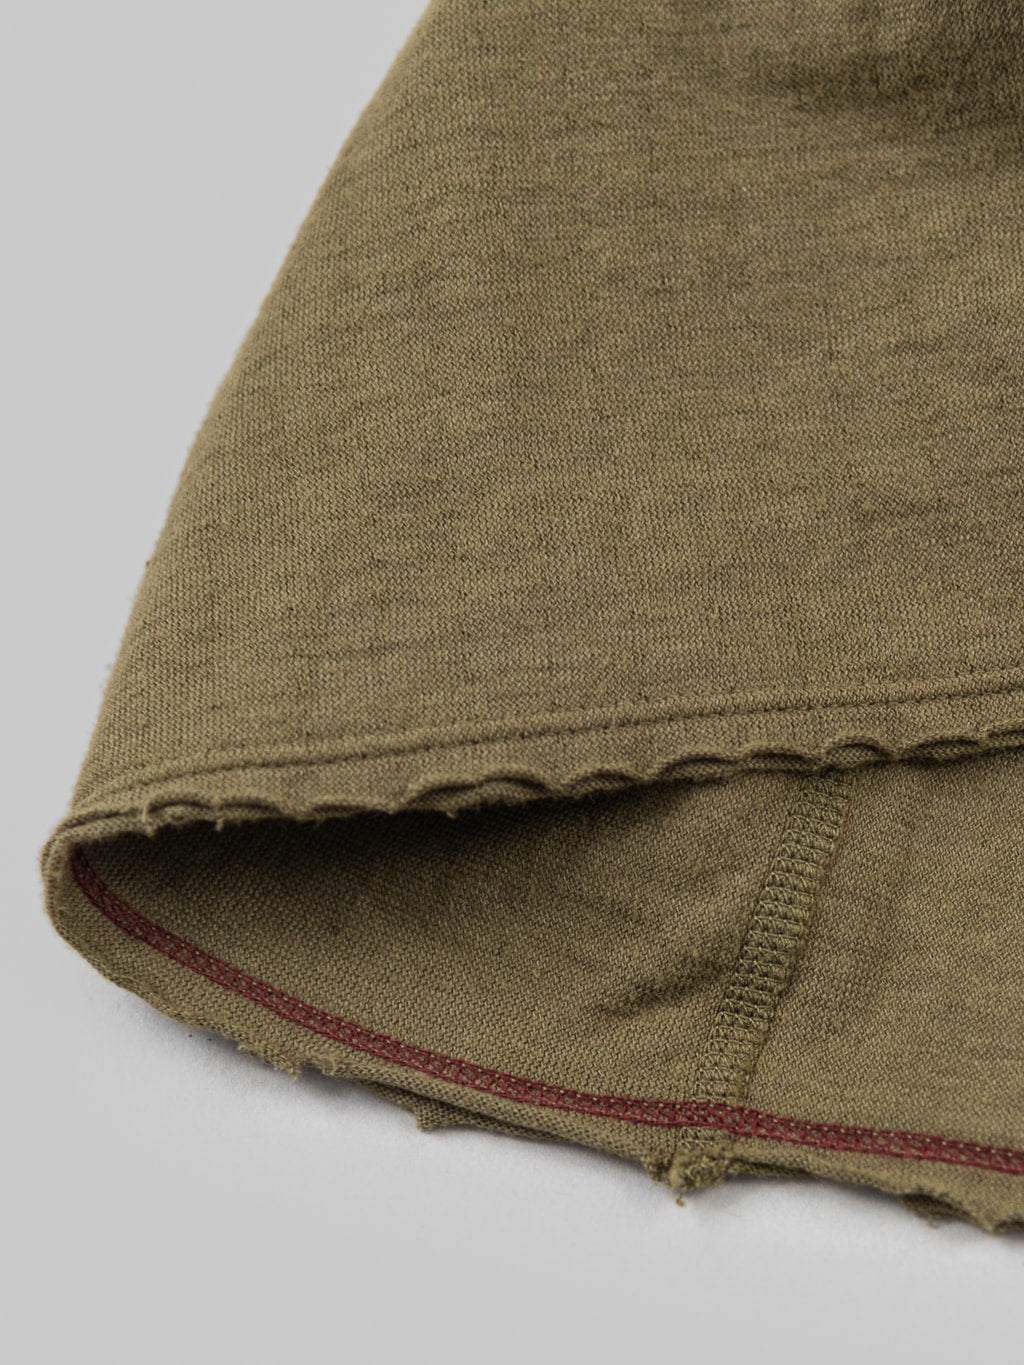 Loop and Weft Dual Layered Knit pocket TShirt olive red seam